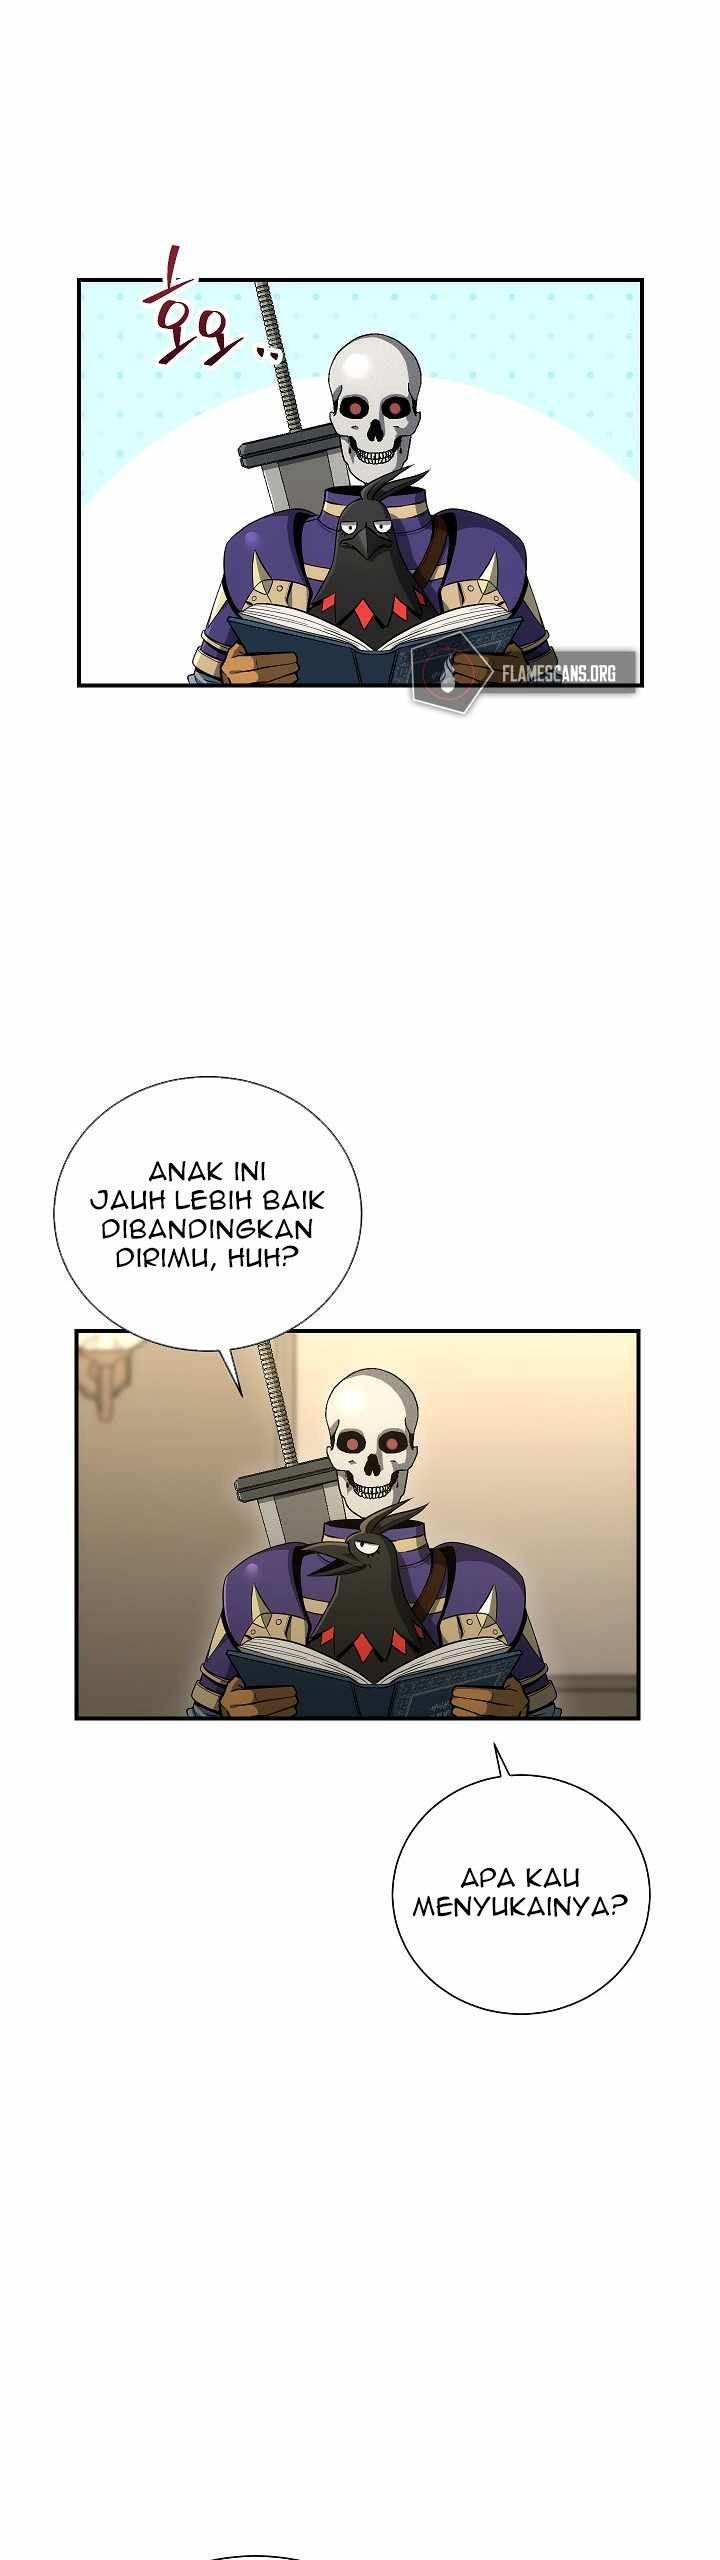 Skeleton Soldier Couldn’t Protect the Dungeon Chapter 159